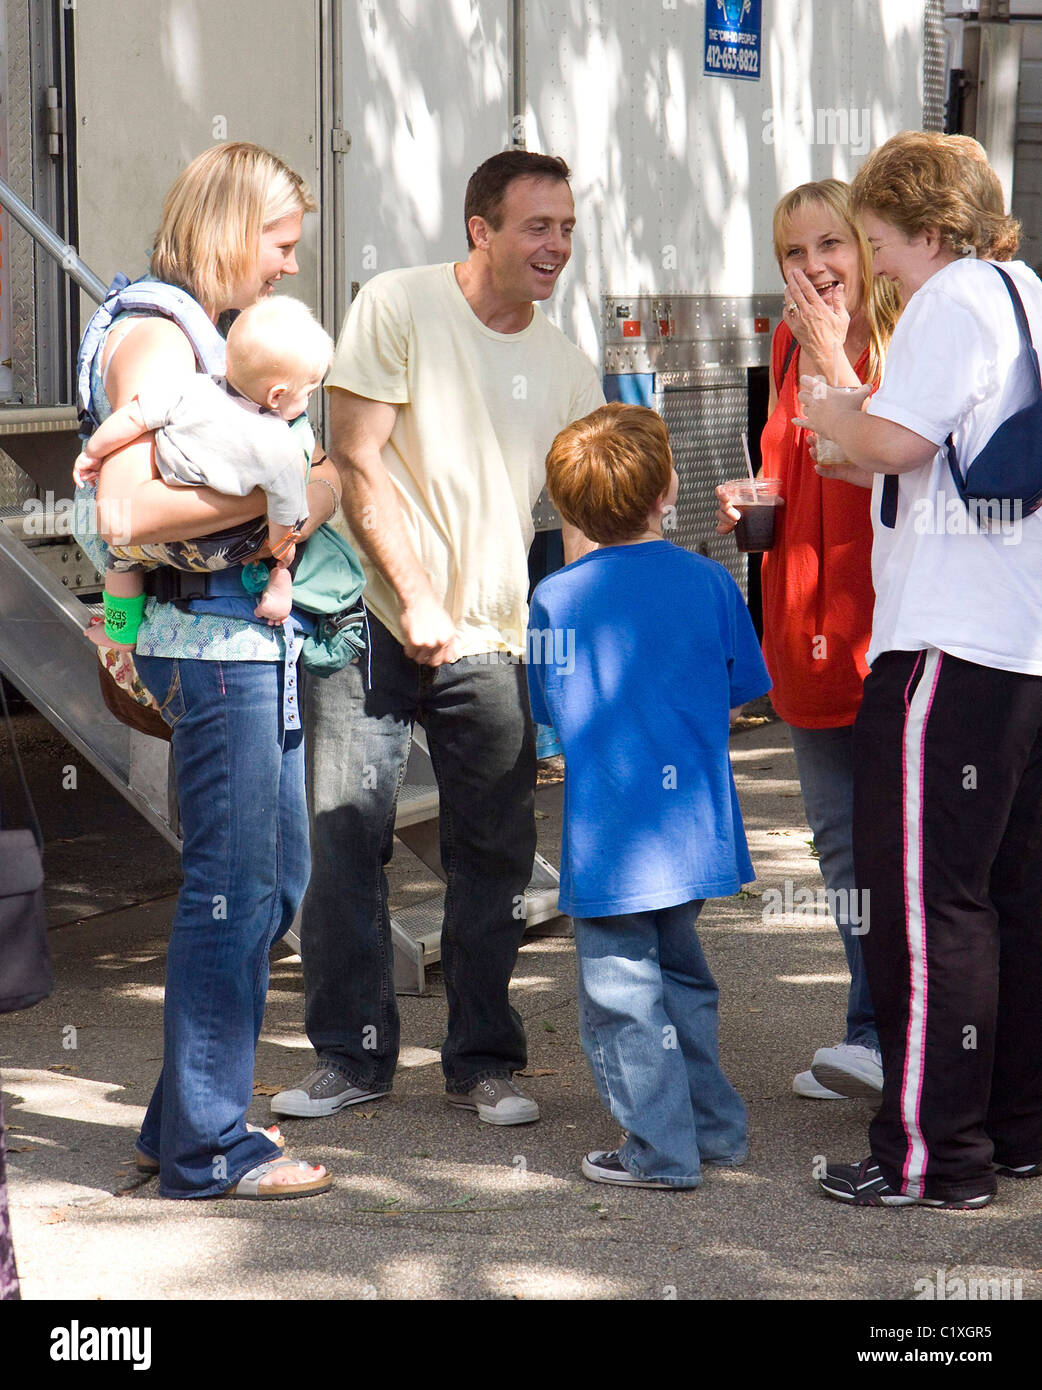 David Eigenberg, son Louie Steven Eigenberg, wife Chrysti and movie son Joseph Pupo on the set of new movie Sex and the City Stock Photo